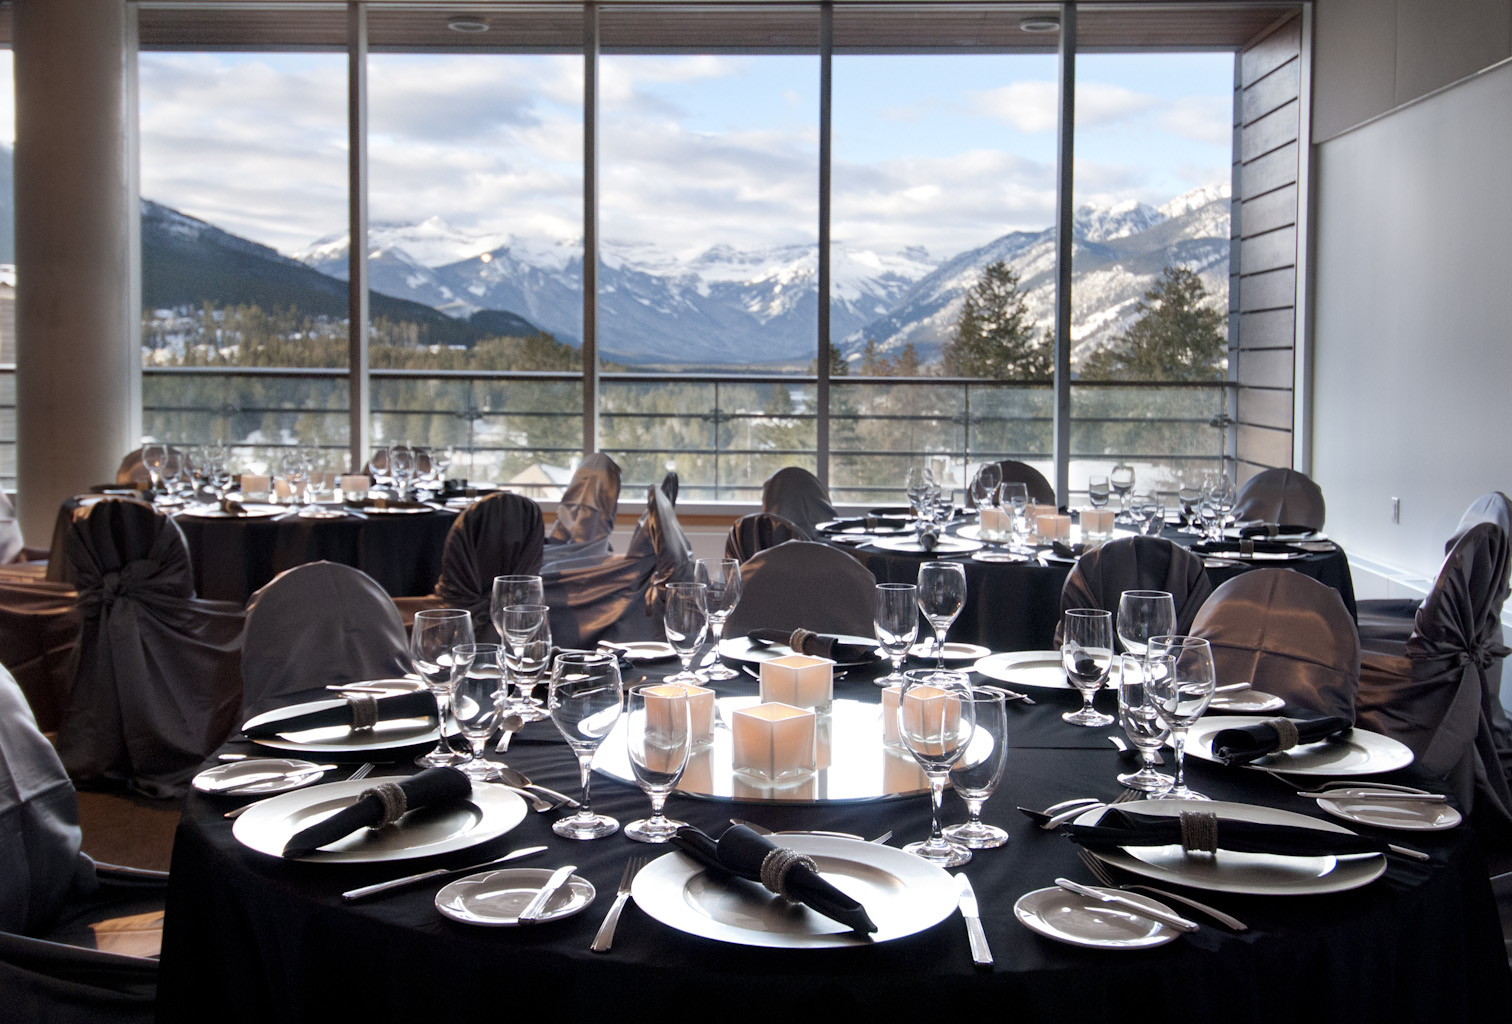 A banquet setup with a balcony view.